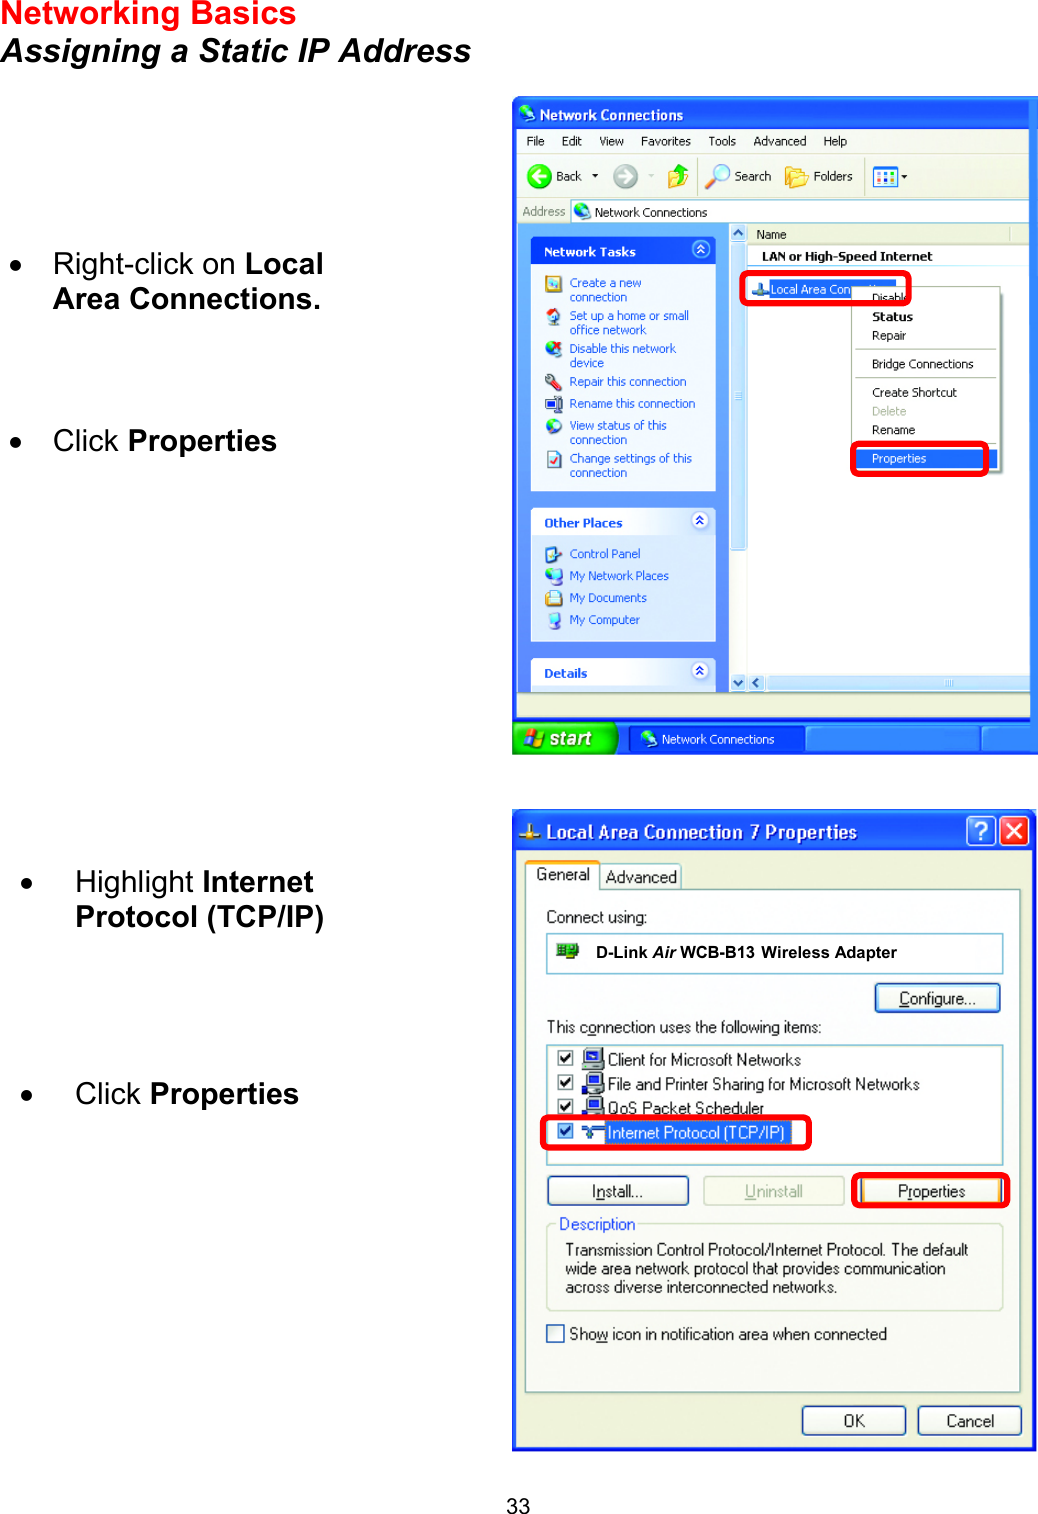  33Networking Basics  Assigning a Static IP Address      •  Right-click on Local Area Connections. •  Click Properties •  Highlight Internet Protocol (TCP/IP)     •  Click Properties        D-Link Air WCB-B13 Wireless Adapter  